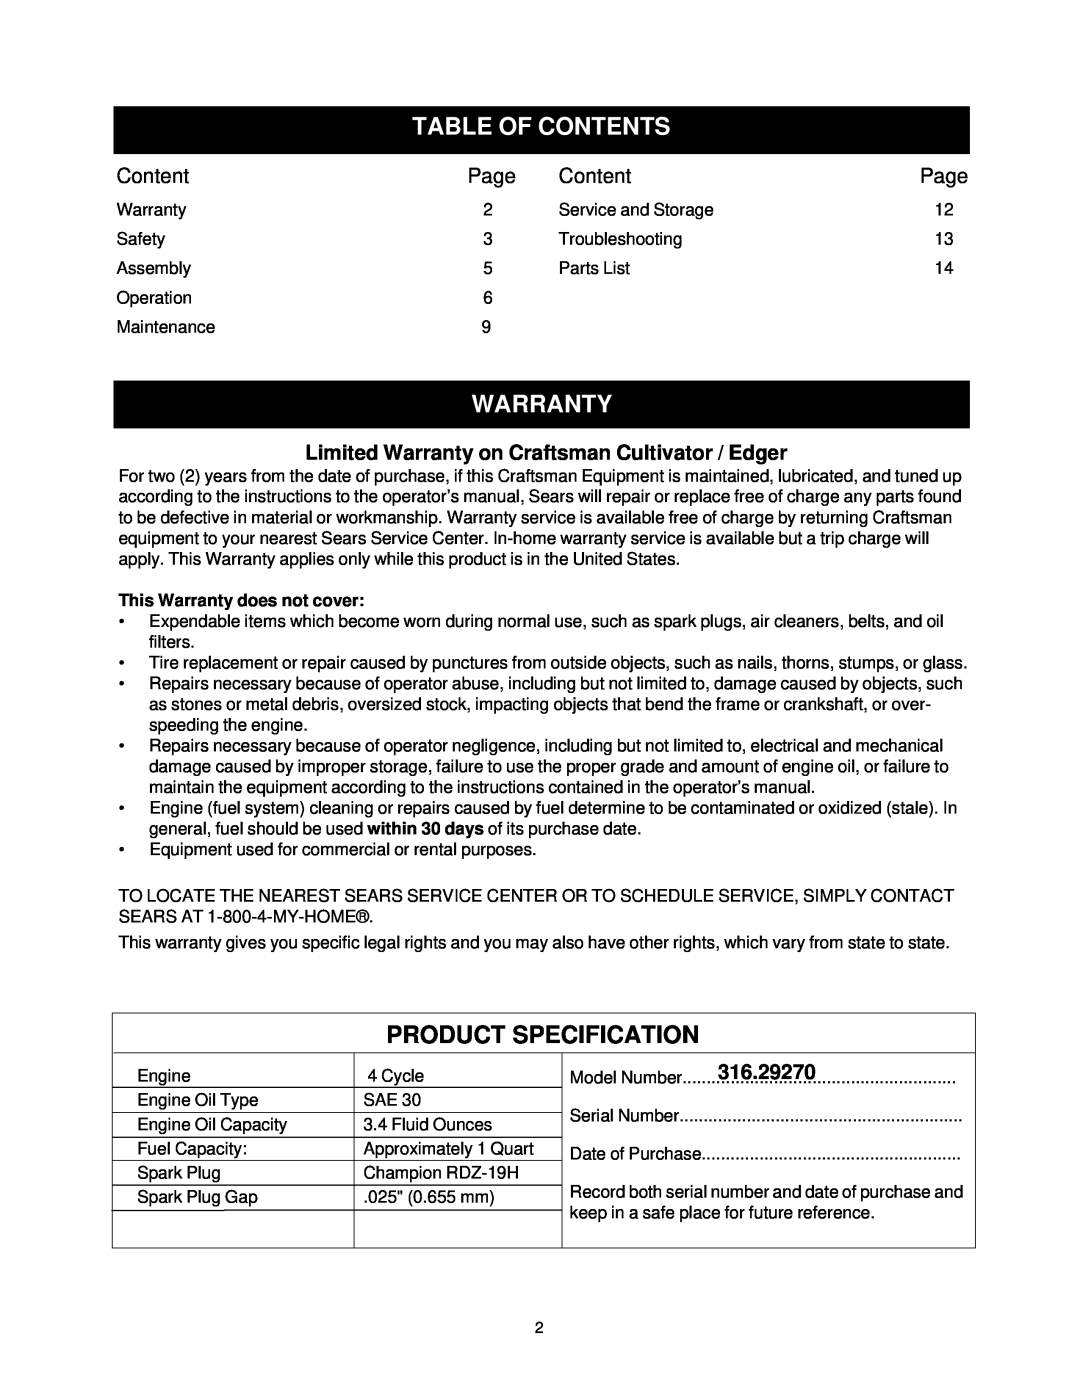 Craftsman manual Table Of Contents, Product Specification, Page, 316.29270, This Warranty does not cover 